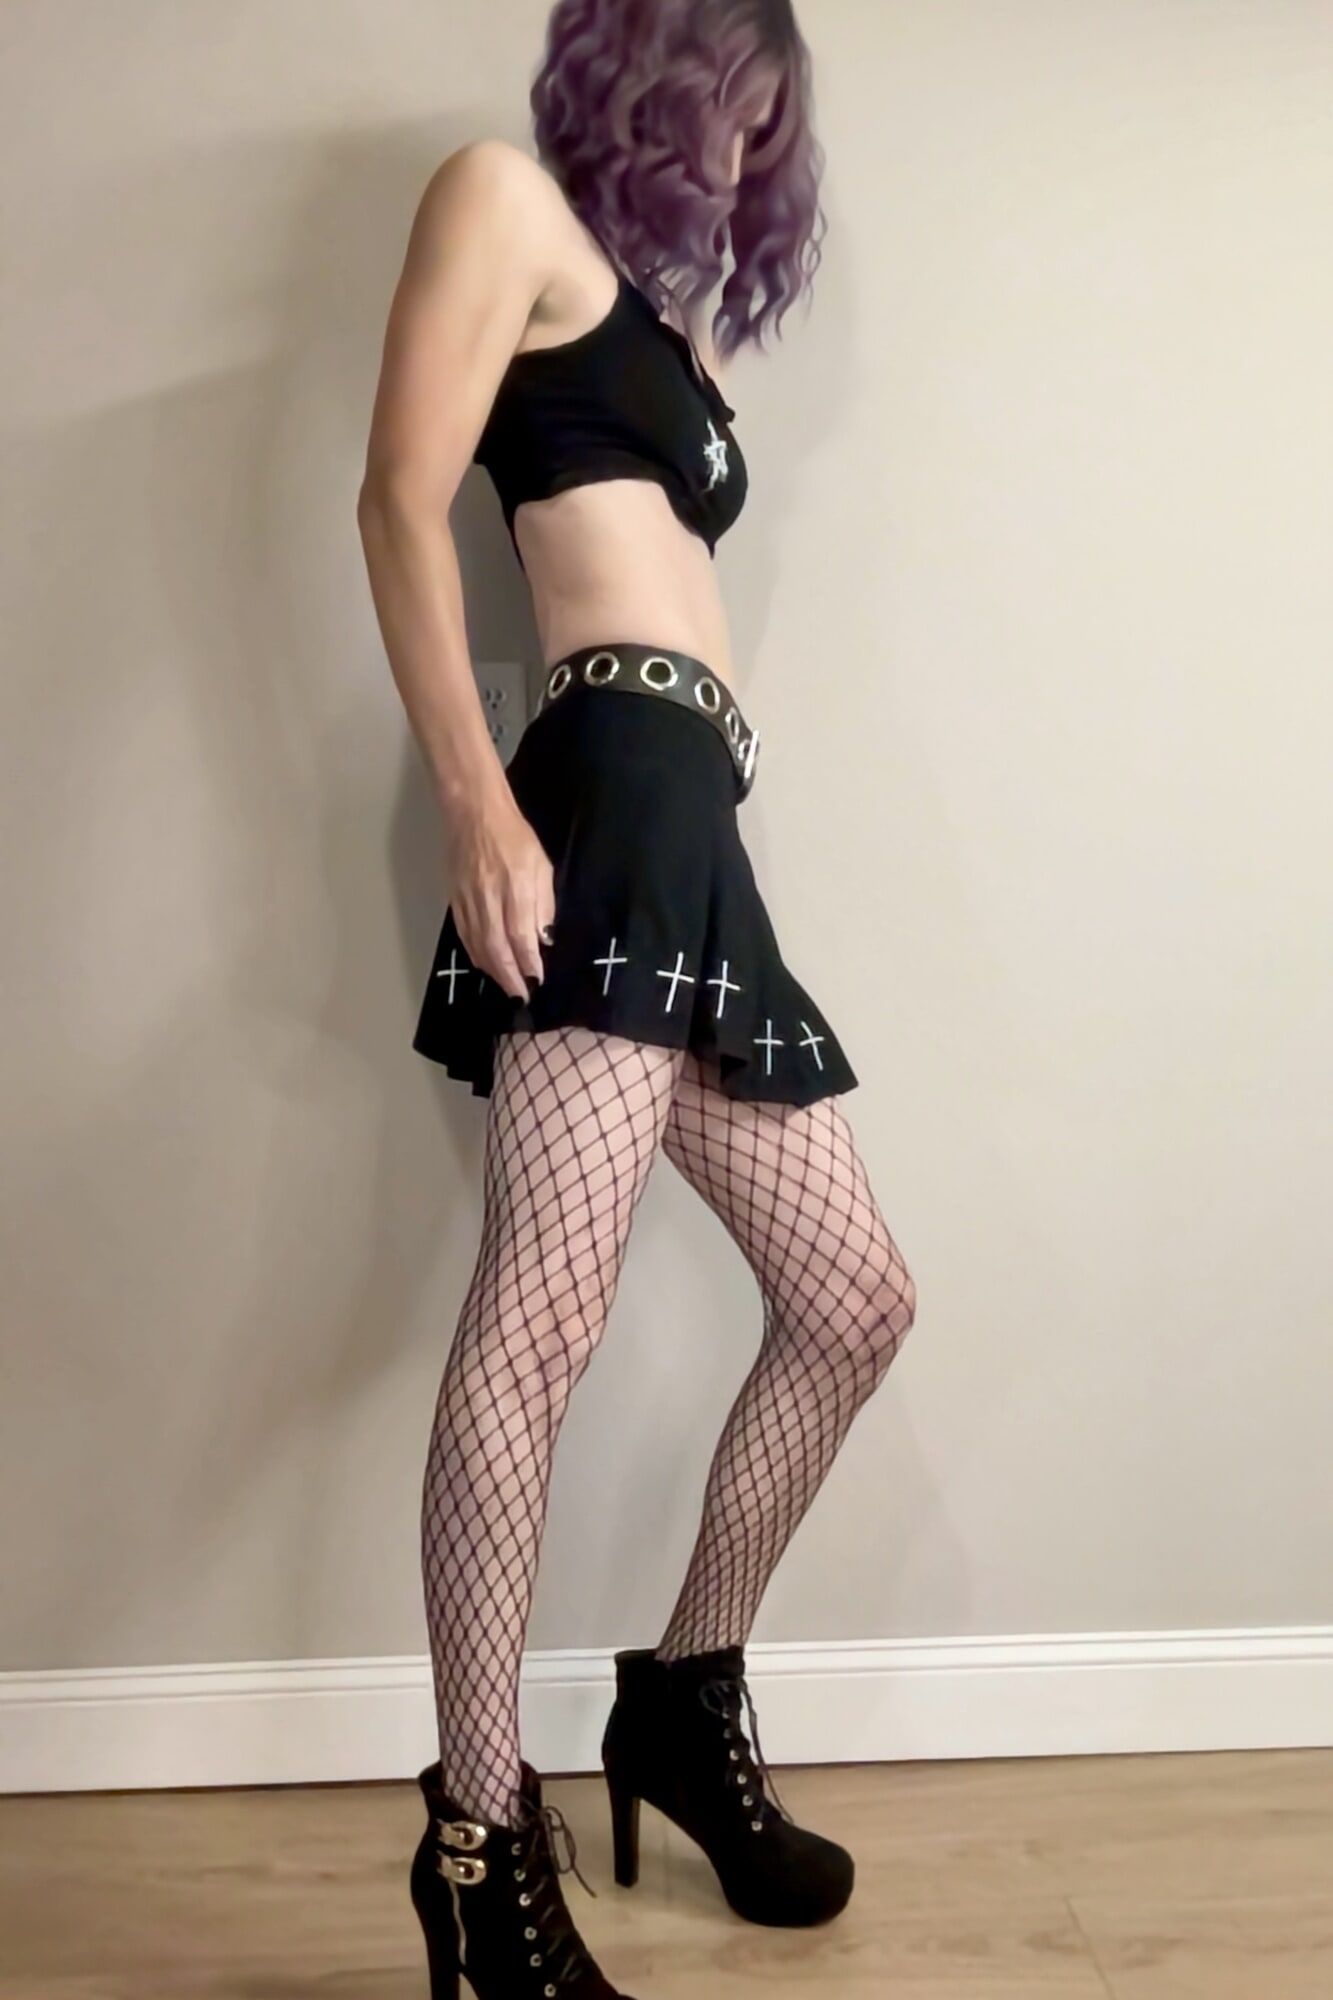 Can I be your goth slut? #2